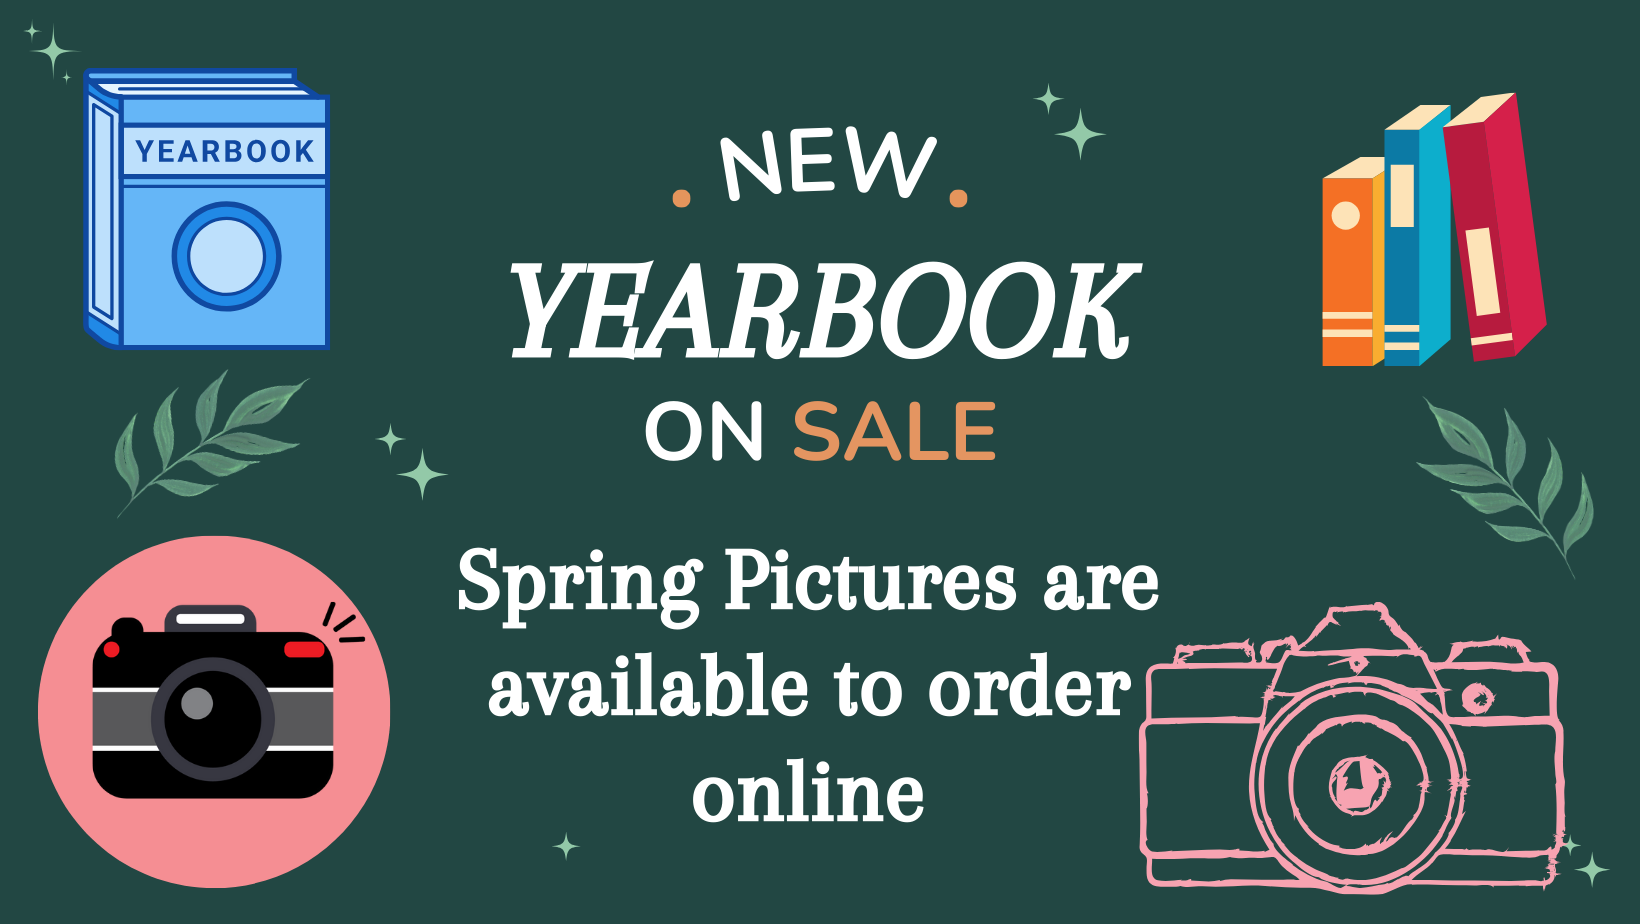 Year book and spring pictures for order online.